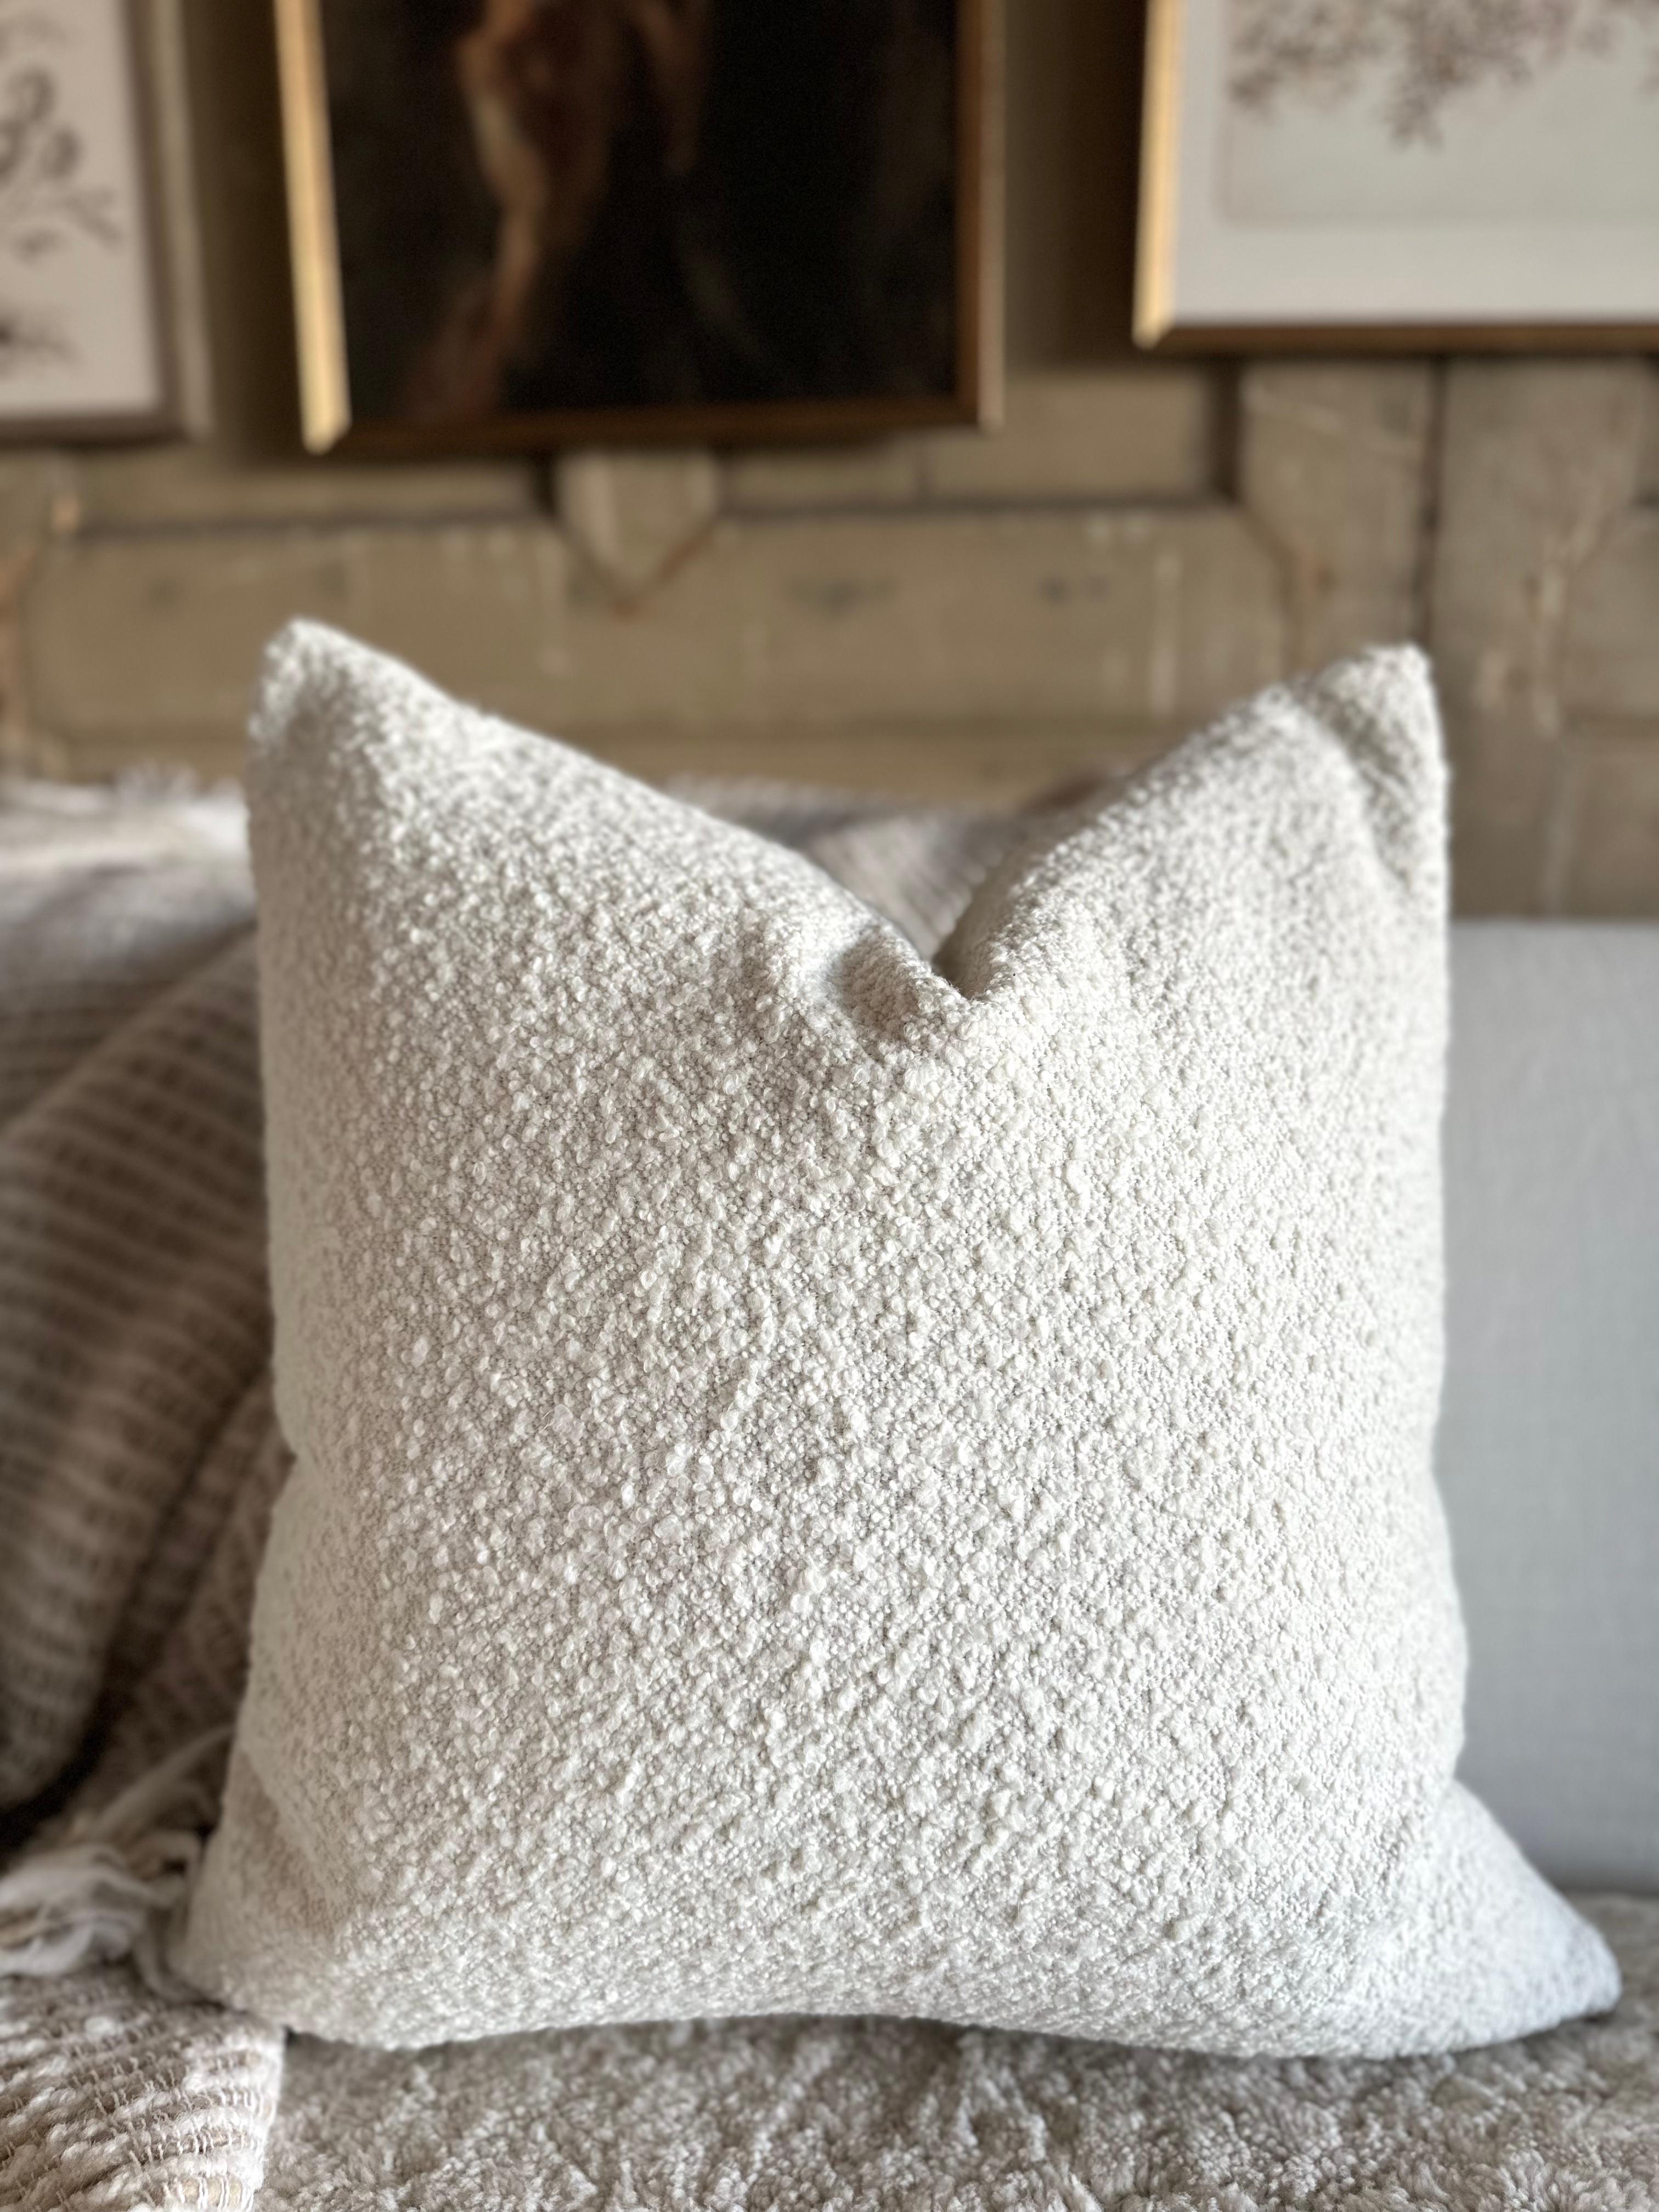 A luxurious wooly bouclette face with stone washed linen back.
Linen & boucle fabric is imported from France.
Custom made to order, can be customized to your size.
Color: BLANC
Antique brass zipper
Size 22x22
Includes Down Feather Insert
Care: Can